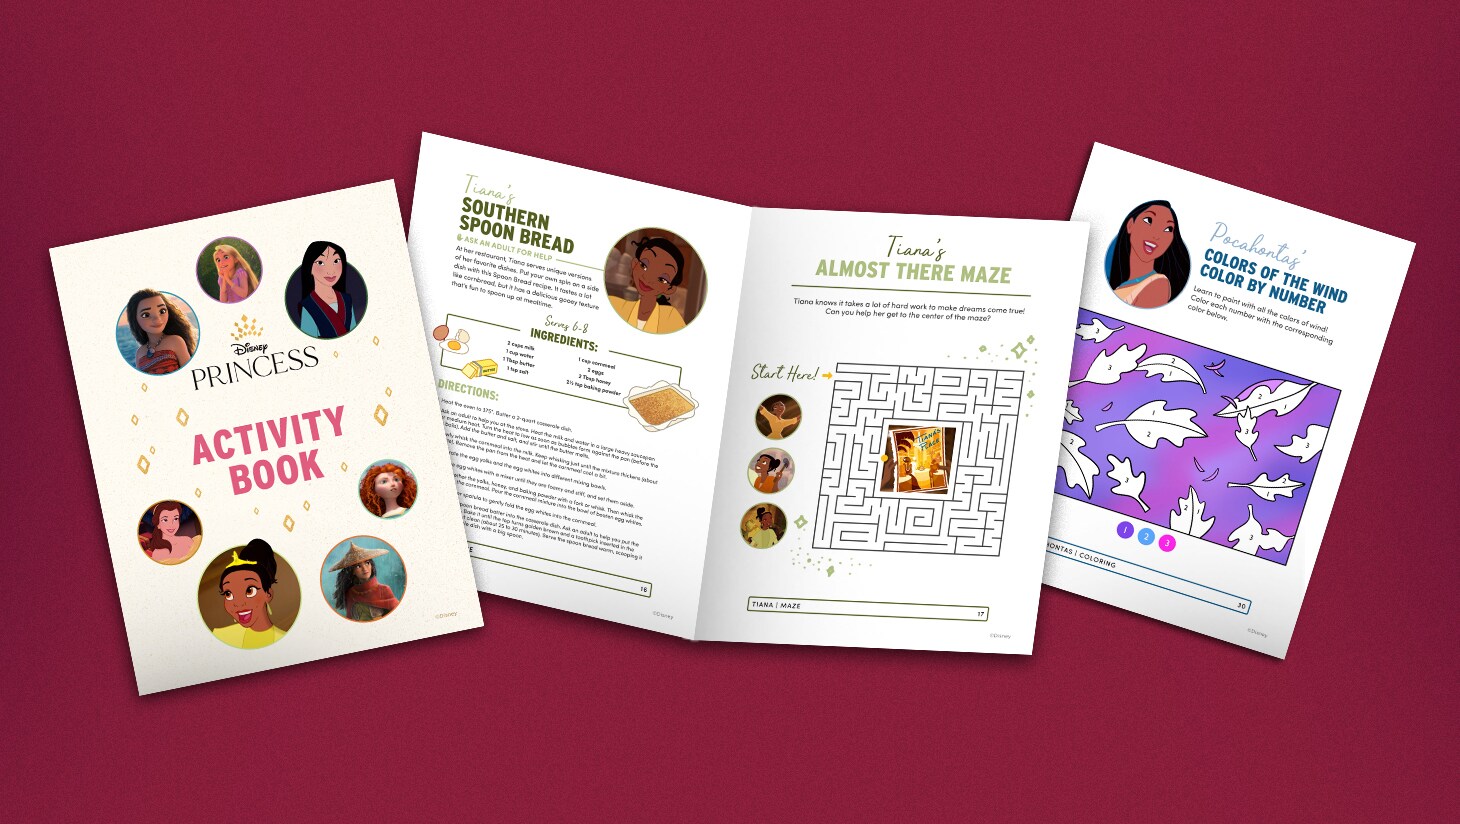 Images of pages from the Disney Princess Activity Book